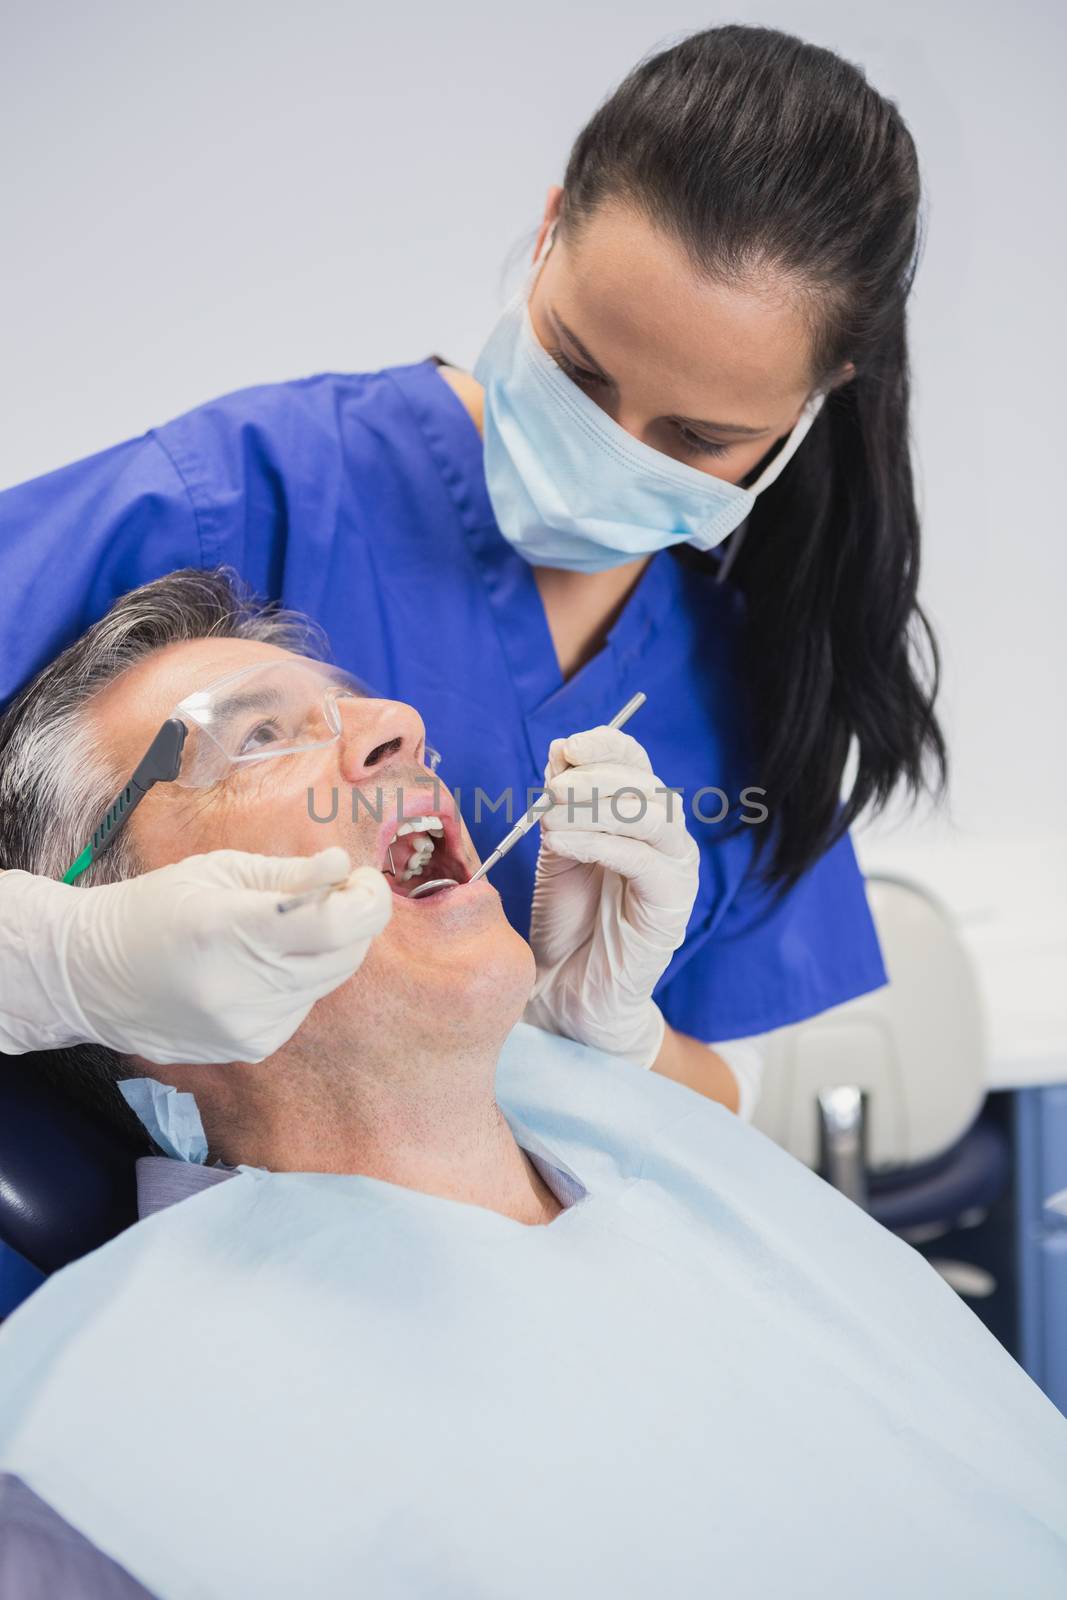 Dentist wearing surgical mask examining patient with tools